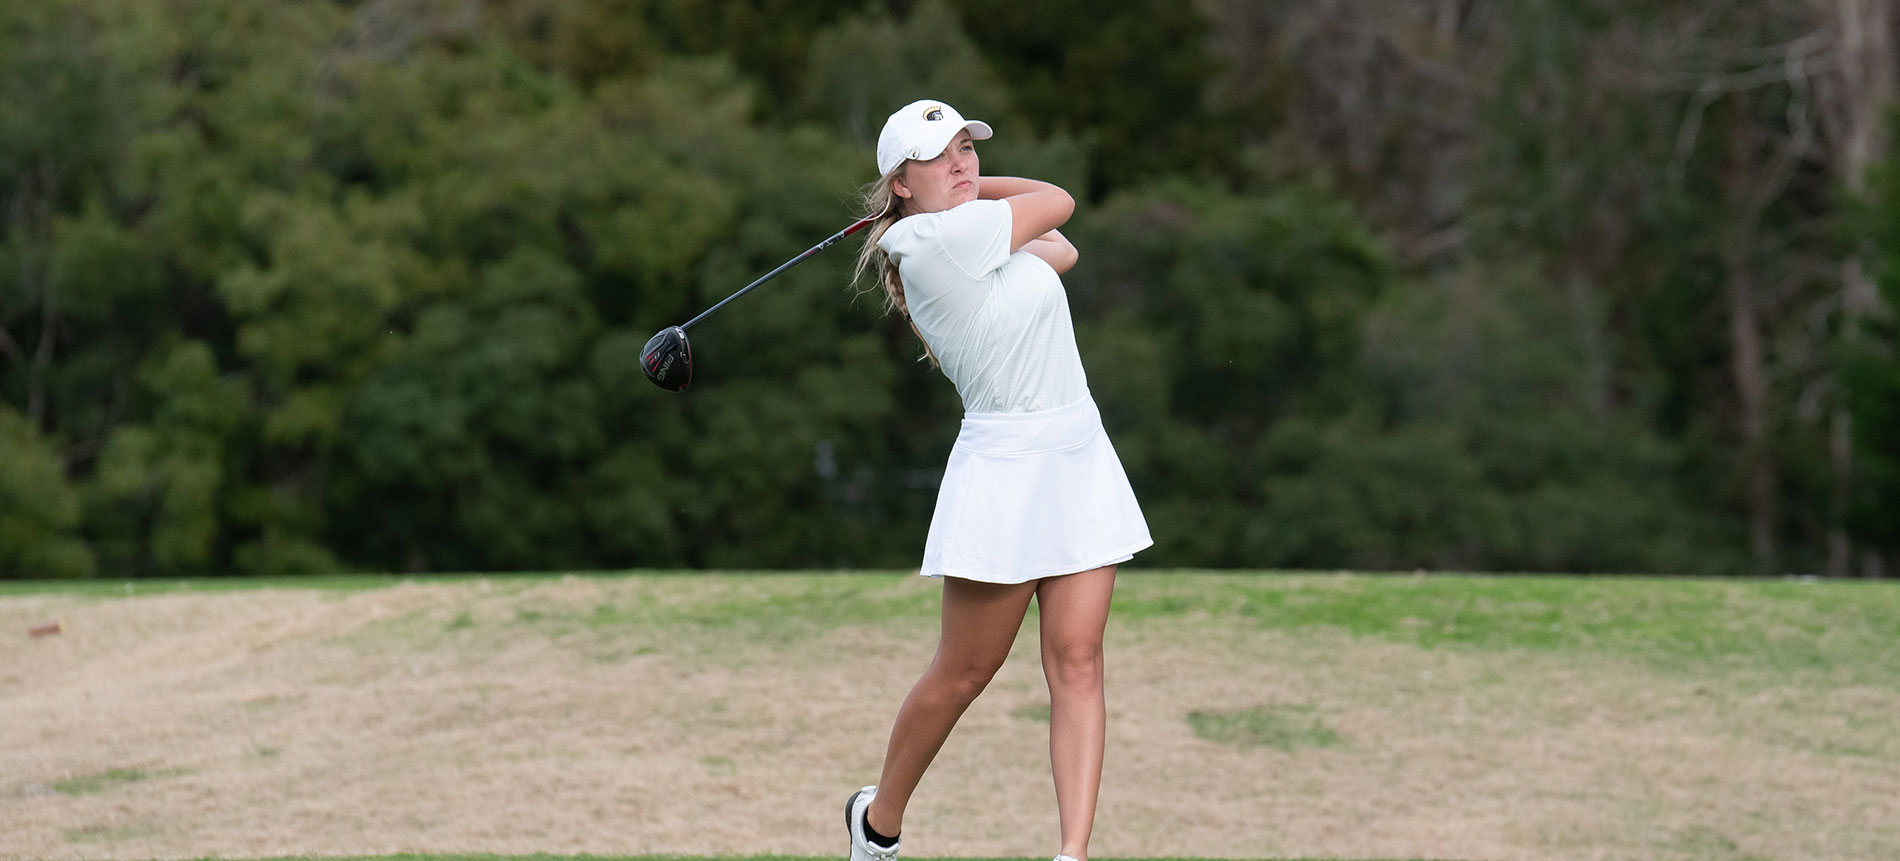 Women’s Golf in Seventh Place Following Opening Day of Peggy Kirk Bell Memorial Invitational